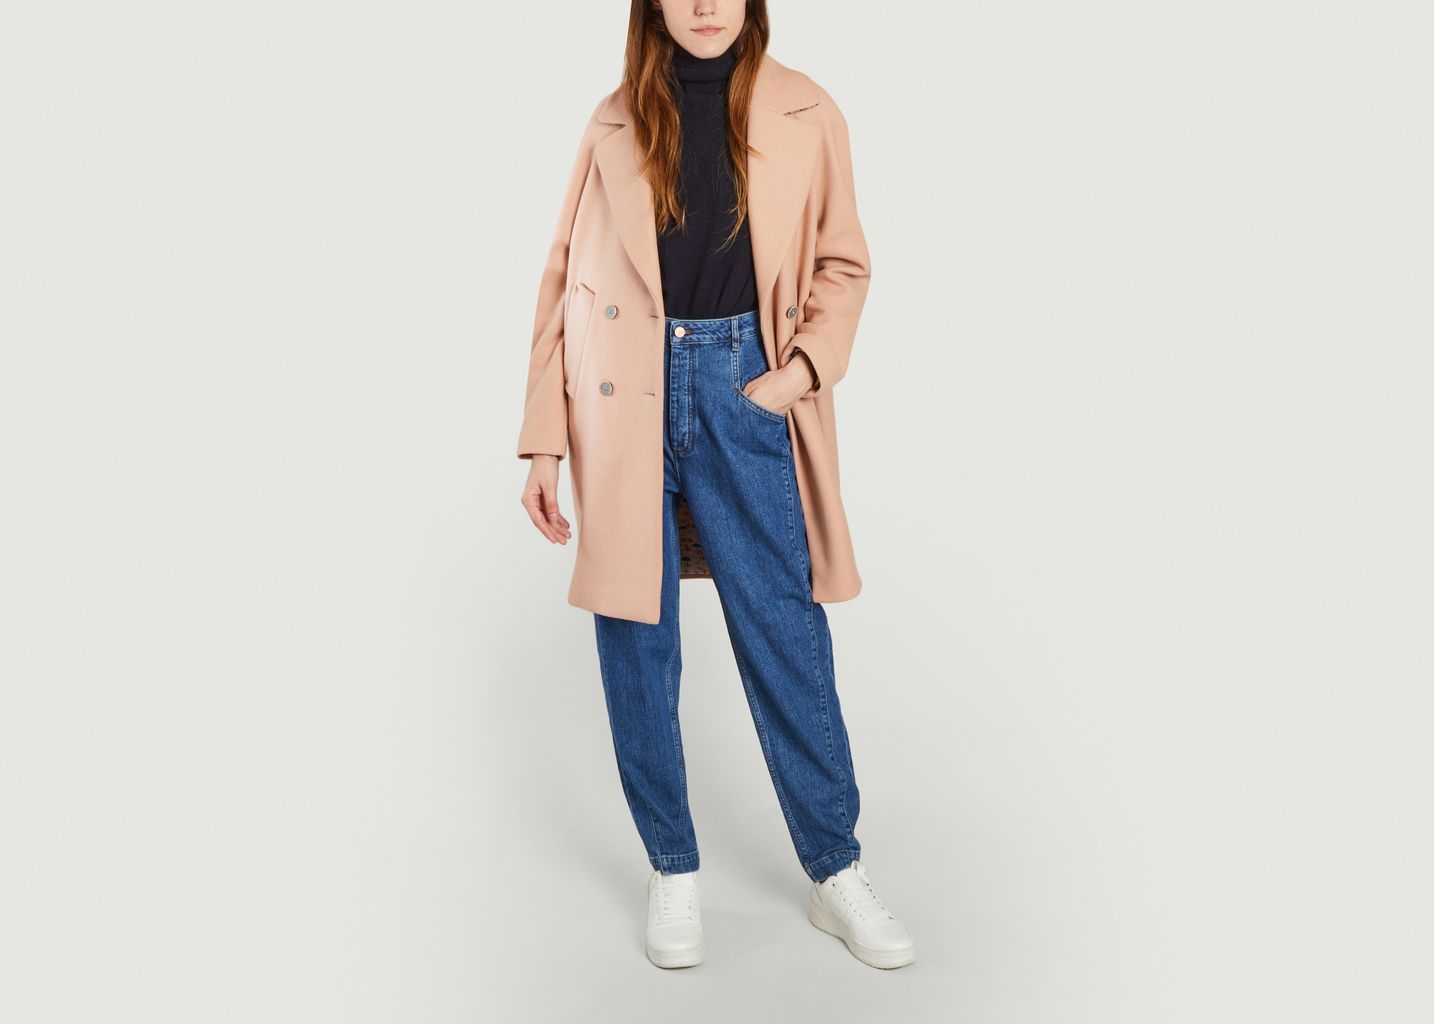 Fayet-Mantel - Trench And Coat